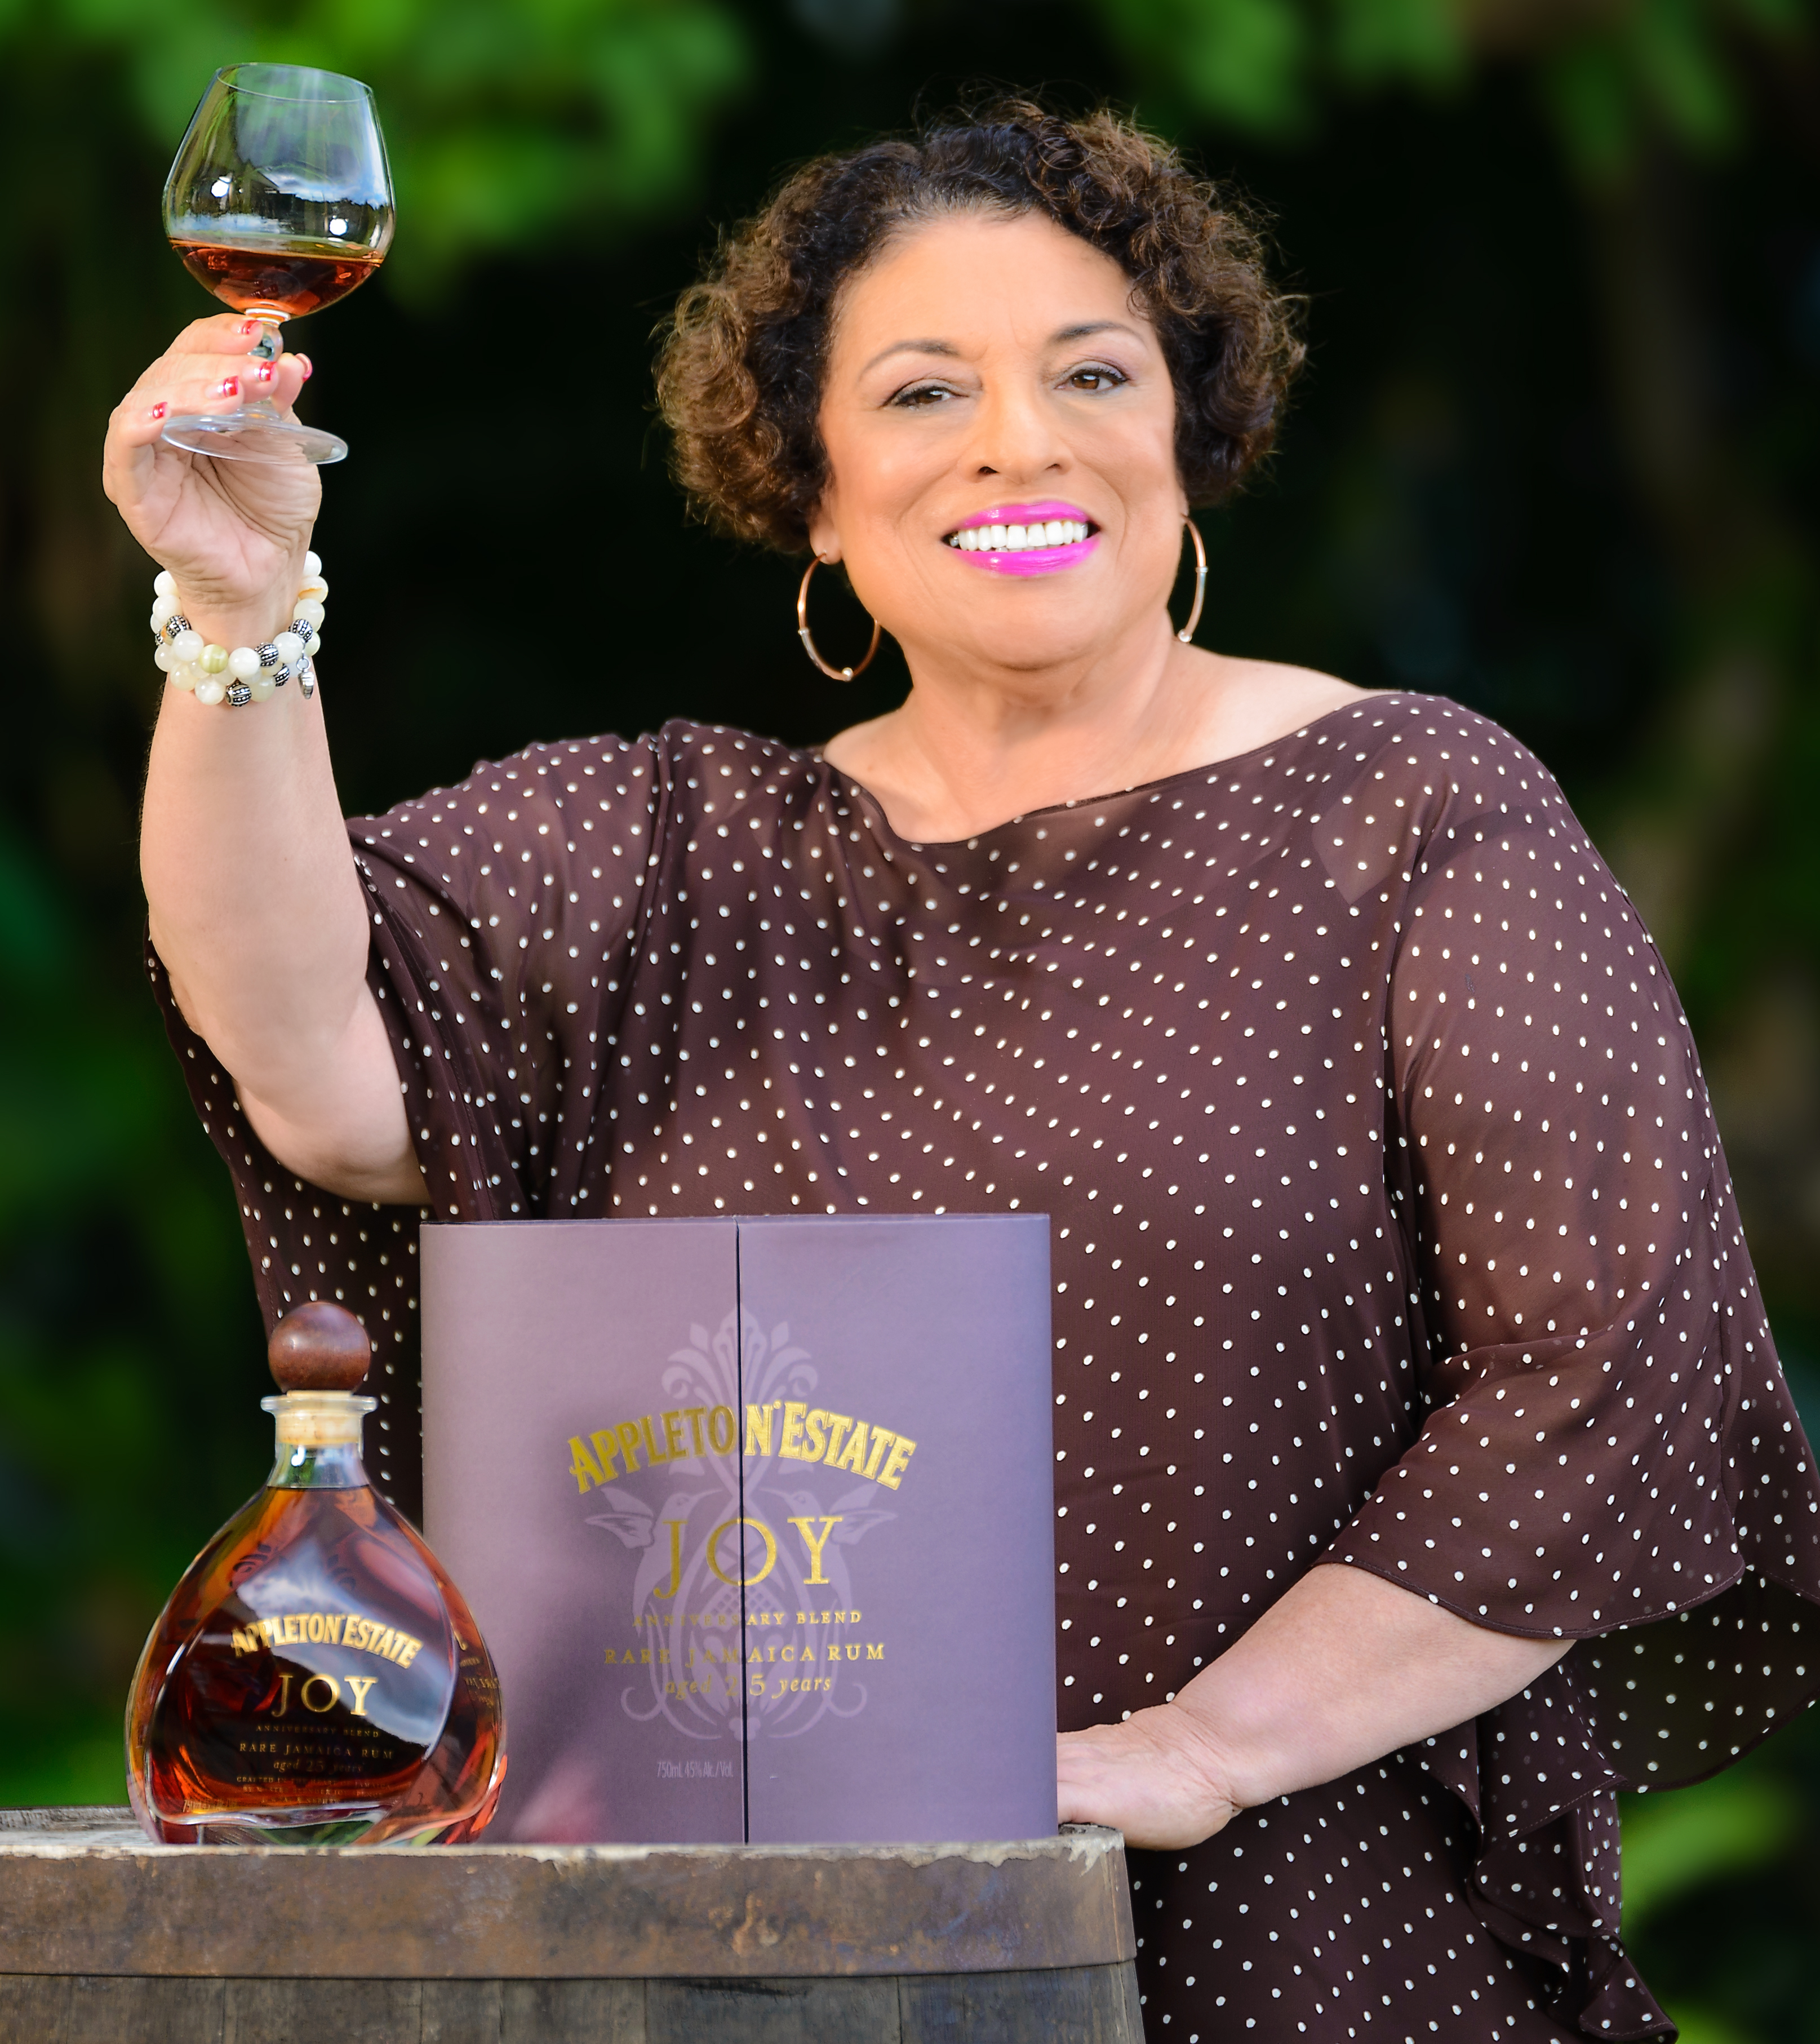 Joy Spence with her special Joy rum from Appleton